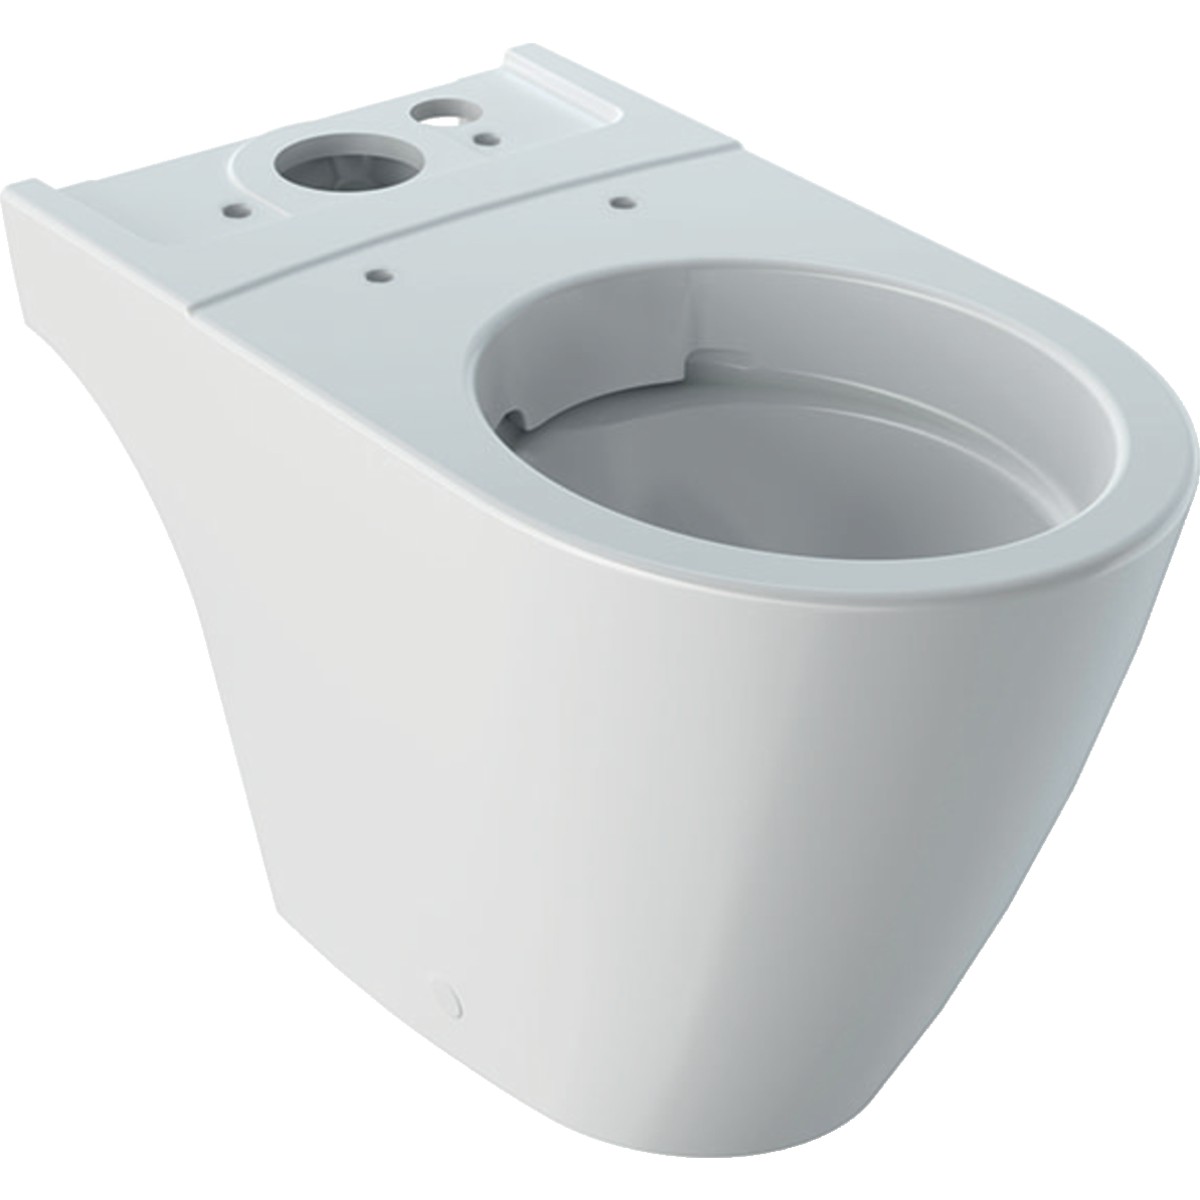 Geberit iCon Rimless close coupled WC pan - White [200460000] - (WC pan only)